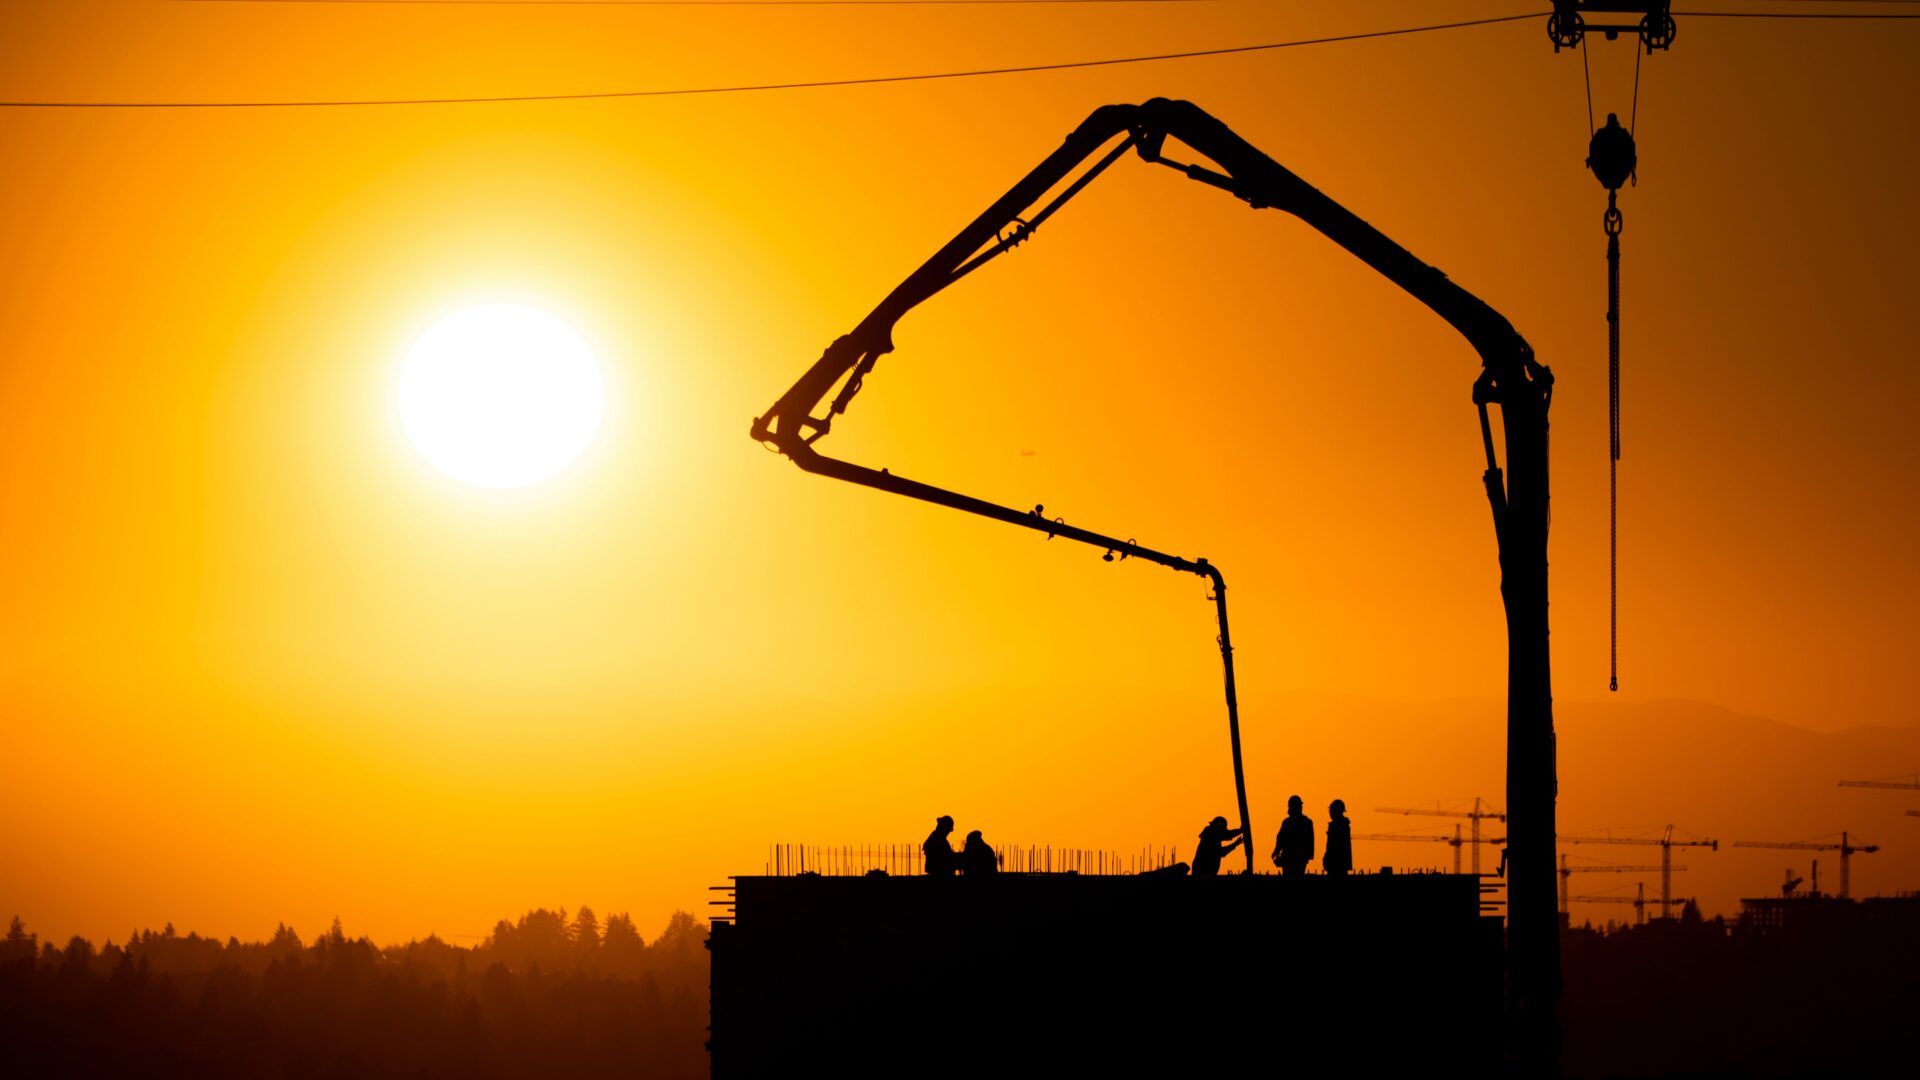 Construction workers at sunset